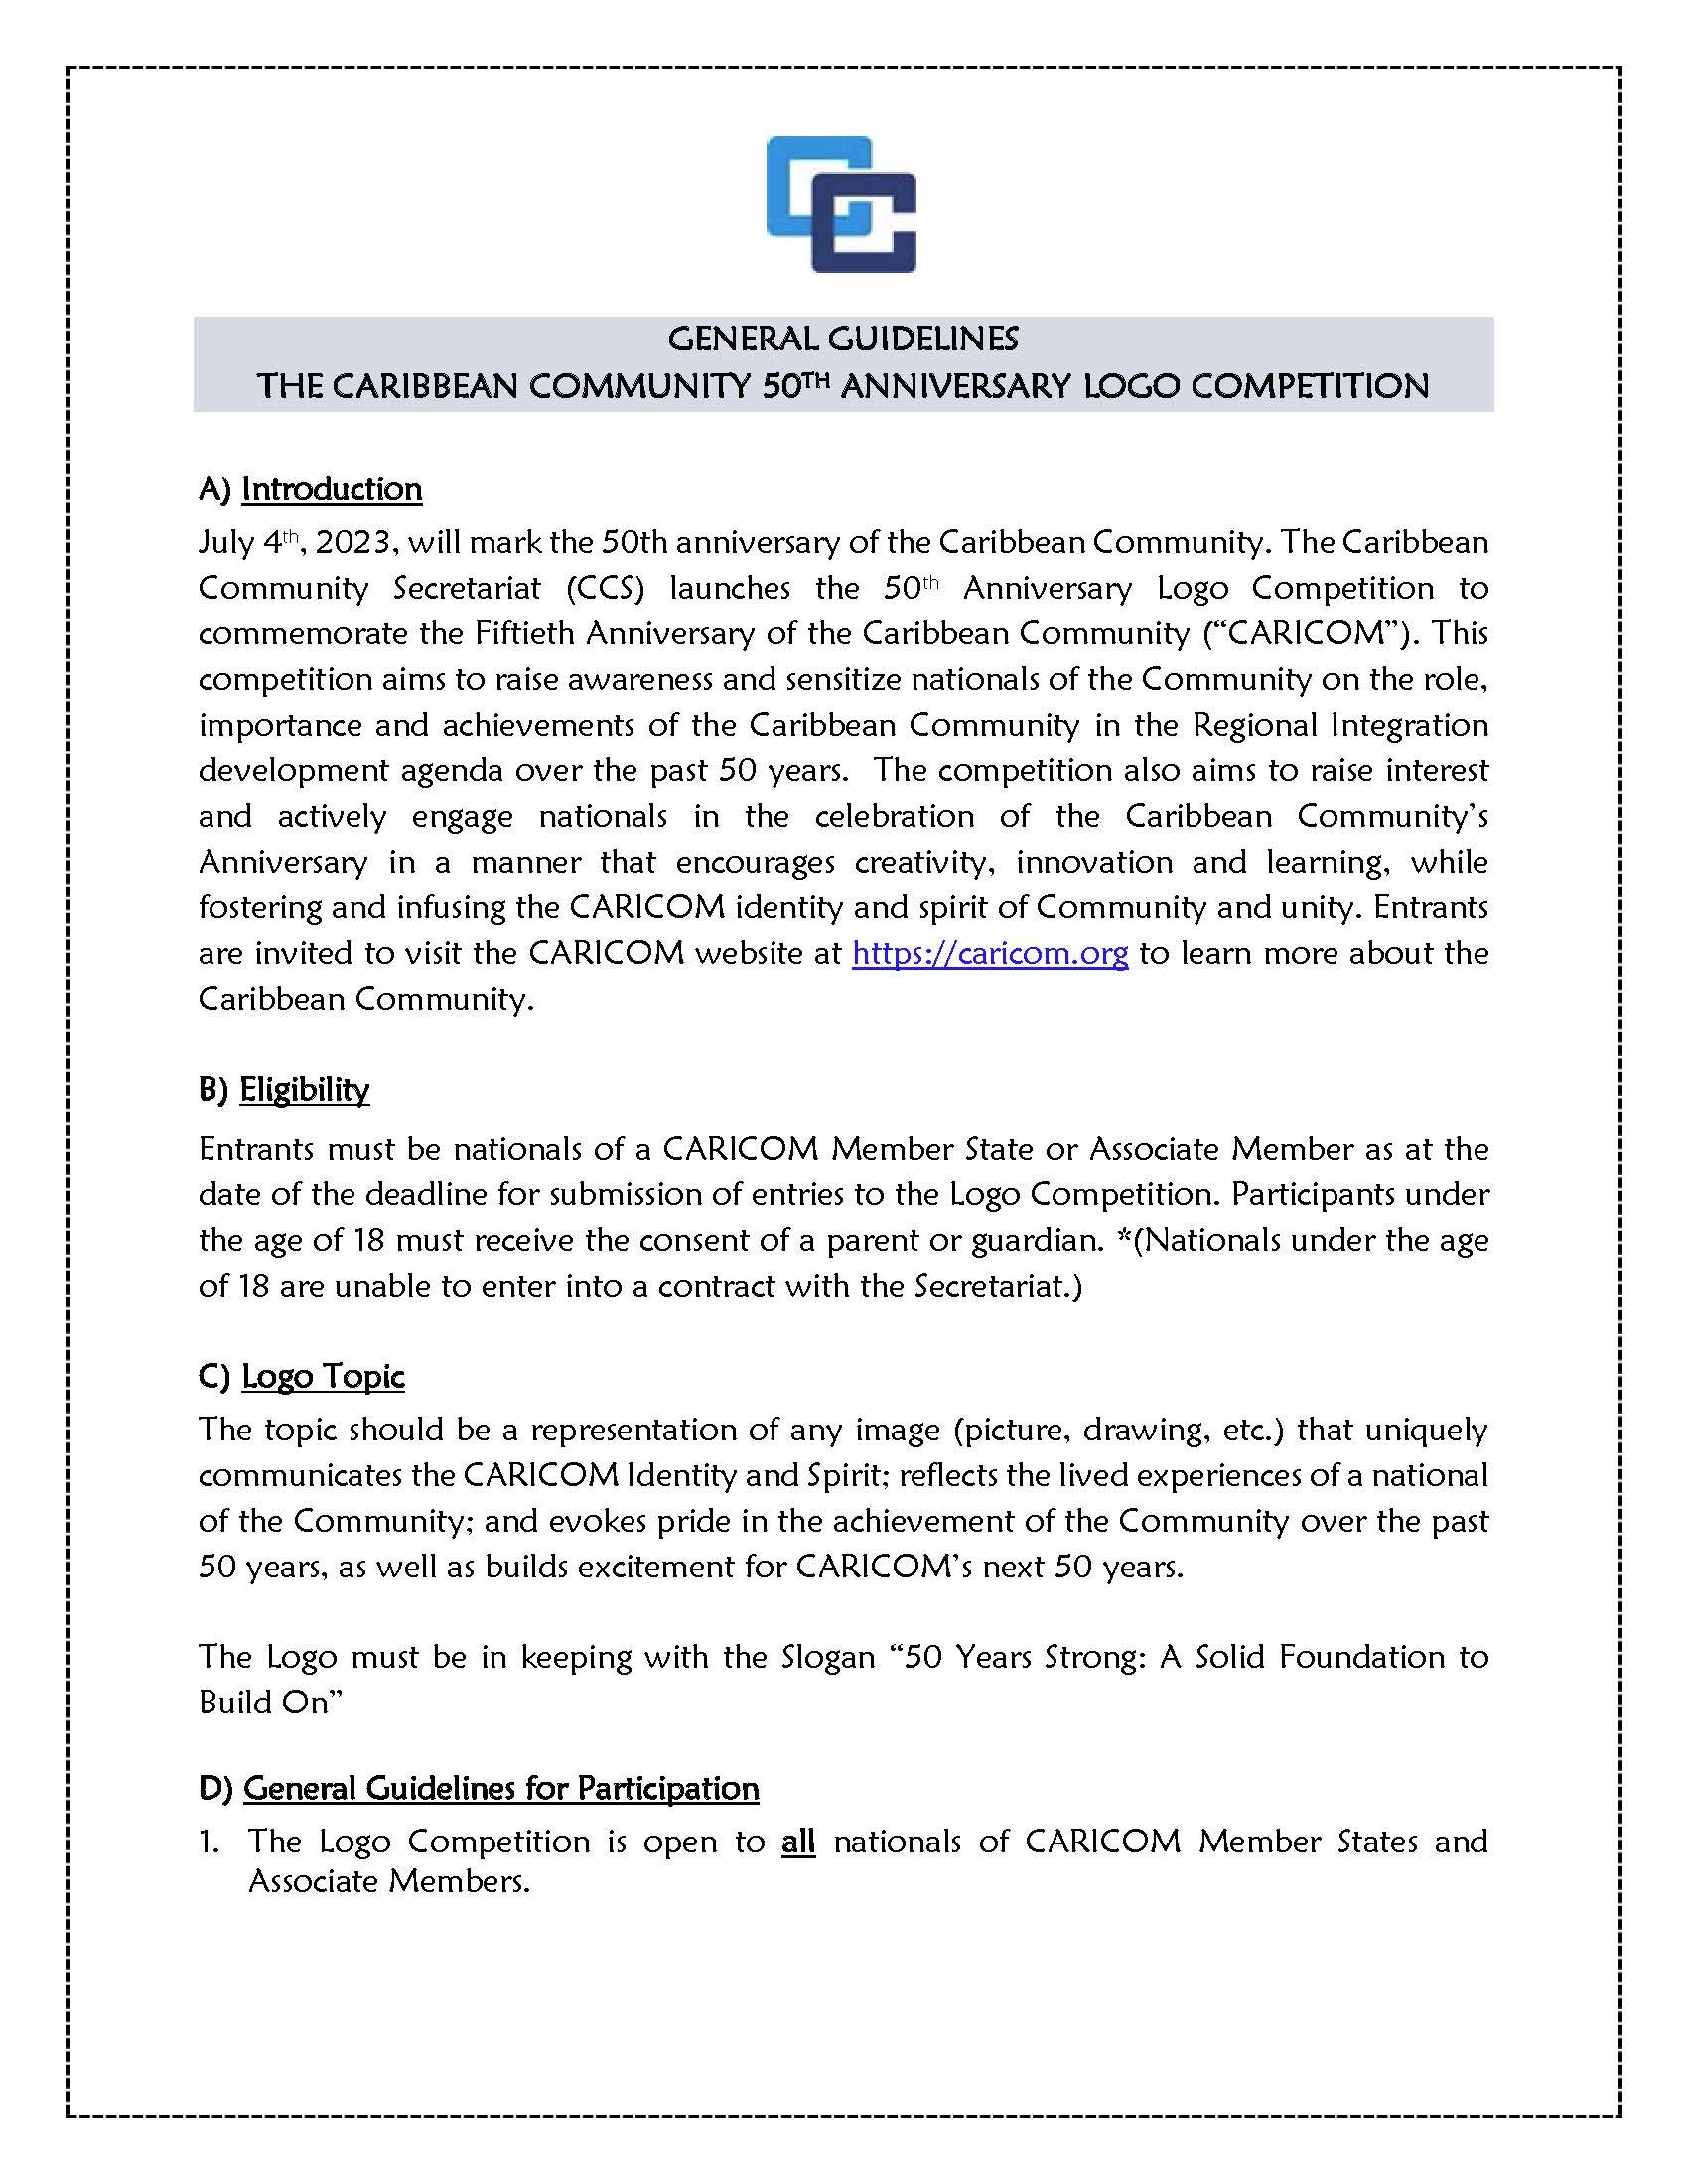 TT CARISEC CARICOM's 50 Anniversary Logo Competition General Guidelines  9 Aug 2022 - FINAL - REV_Page_1